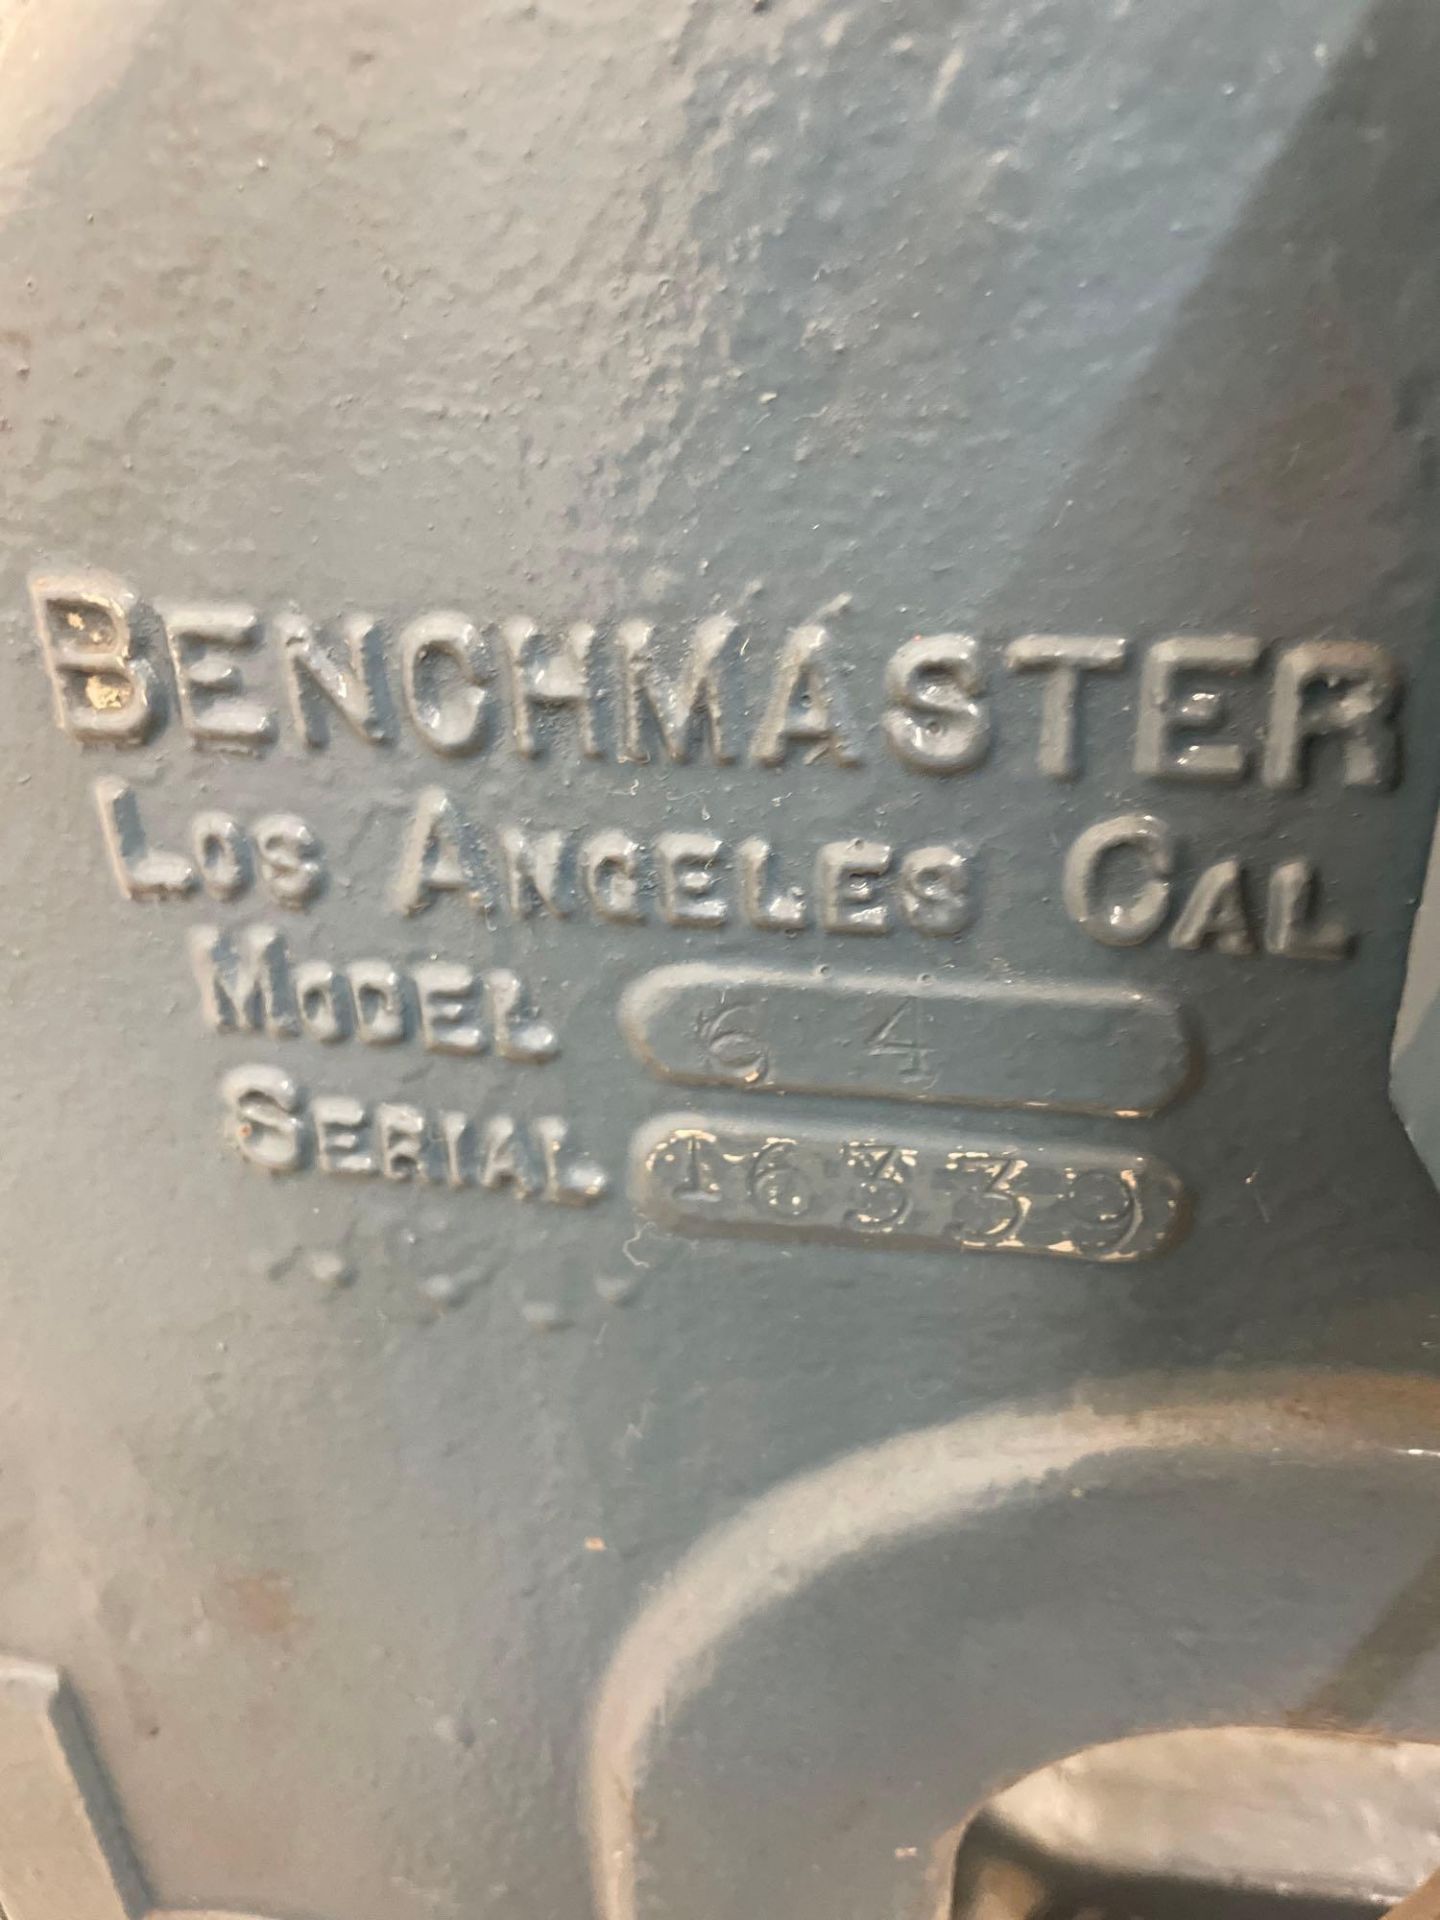 Benchmaster 64 OBI Punch Press, s/n 16339 *Location # 2* - Image 3 of 4